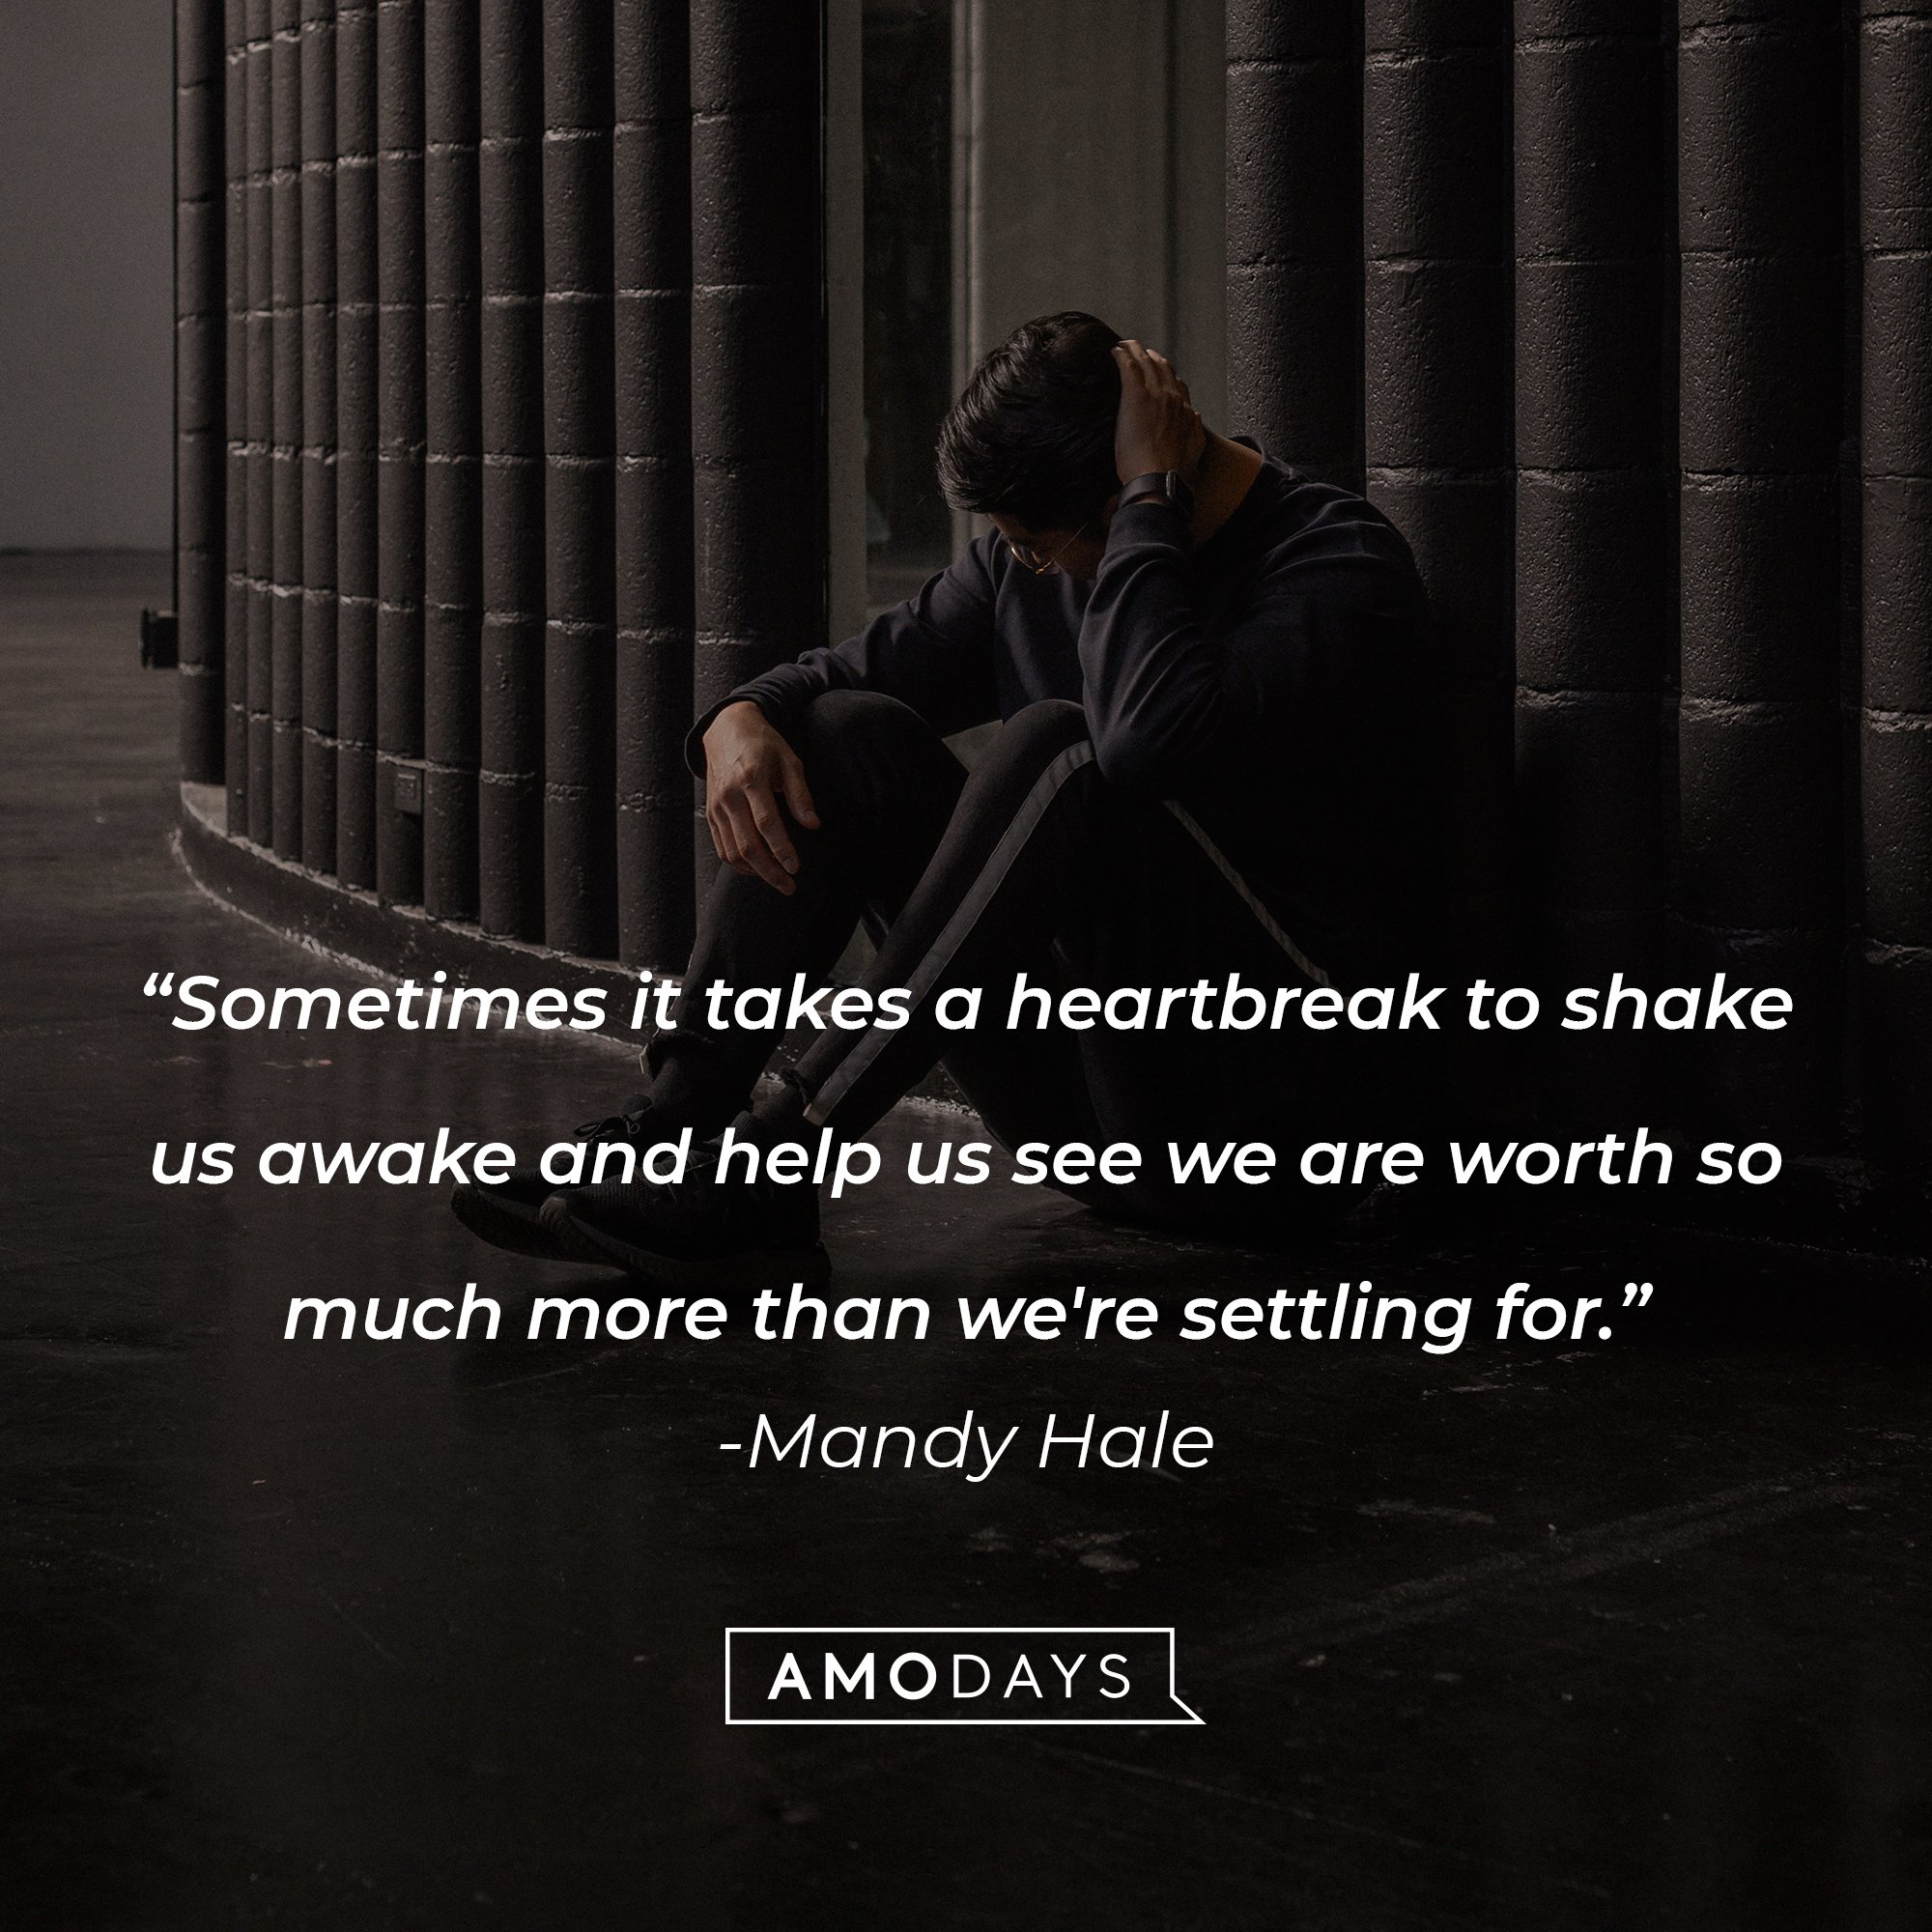 Mandy Hale’s quote: "Sometimes it takes a heartbreak to shake us awake and help us see we are worth so much more than we're settling for." | Image: AmoDays